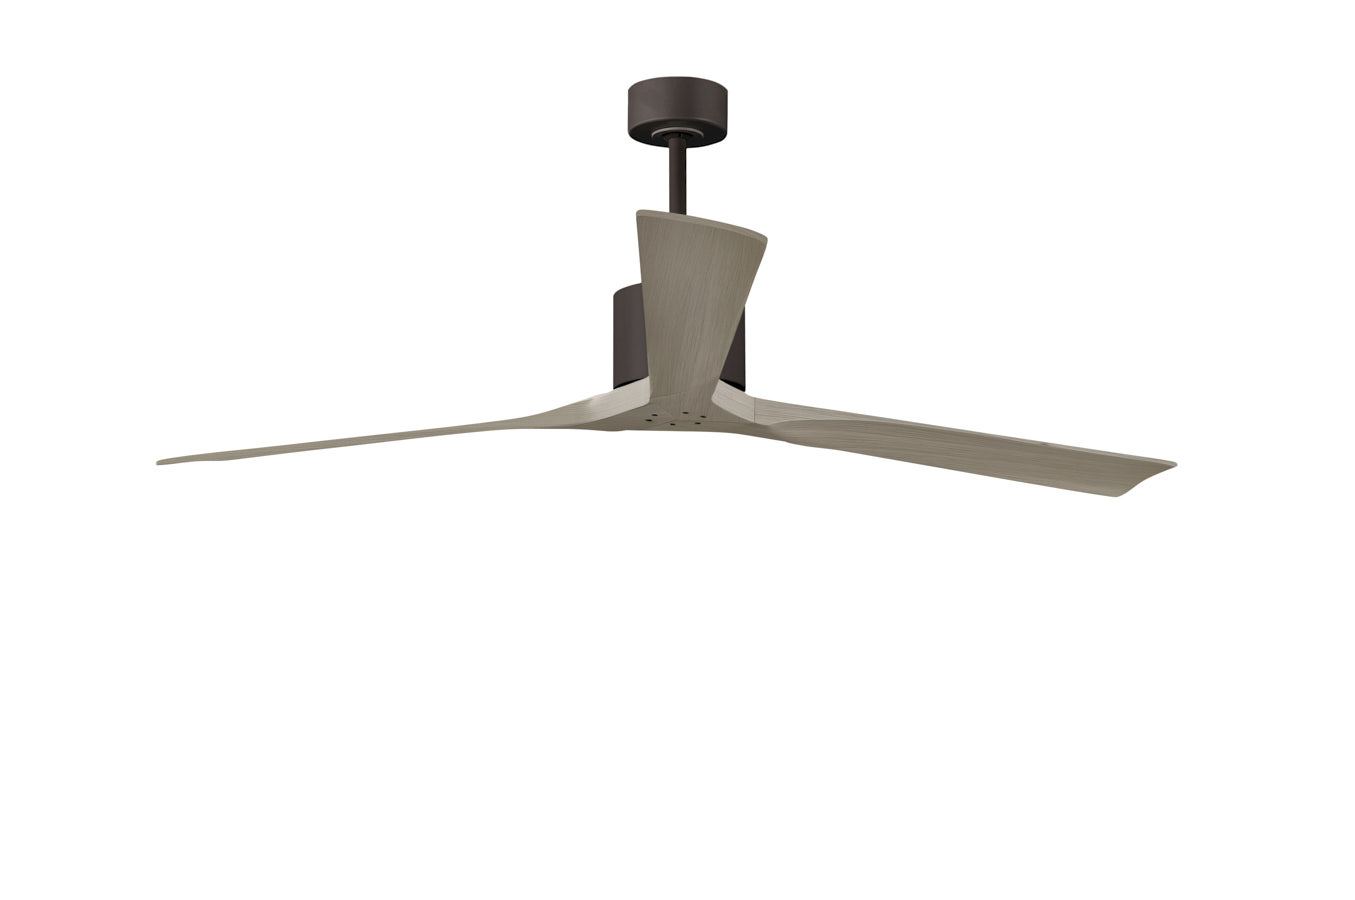 Nan XL ceiling fan in Textured Bronze with 72” Gray Ash blades